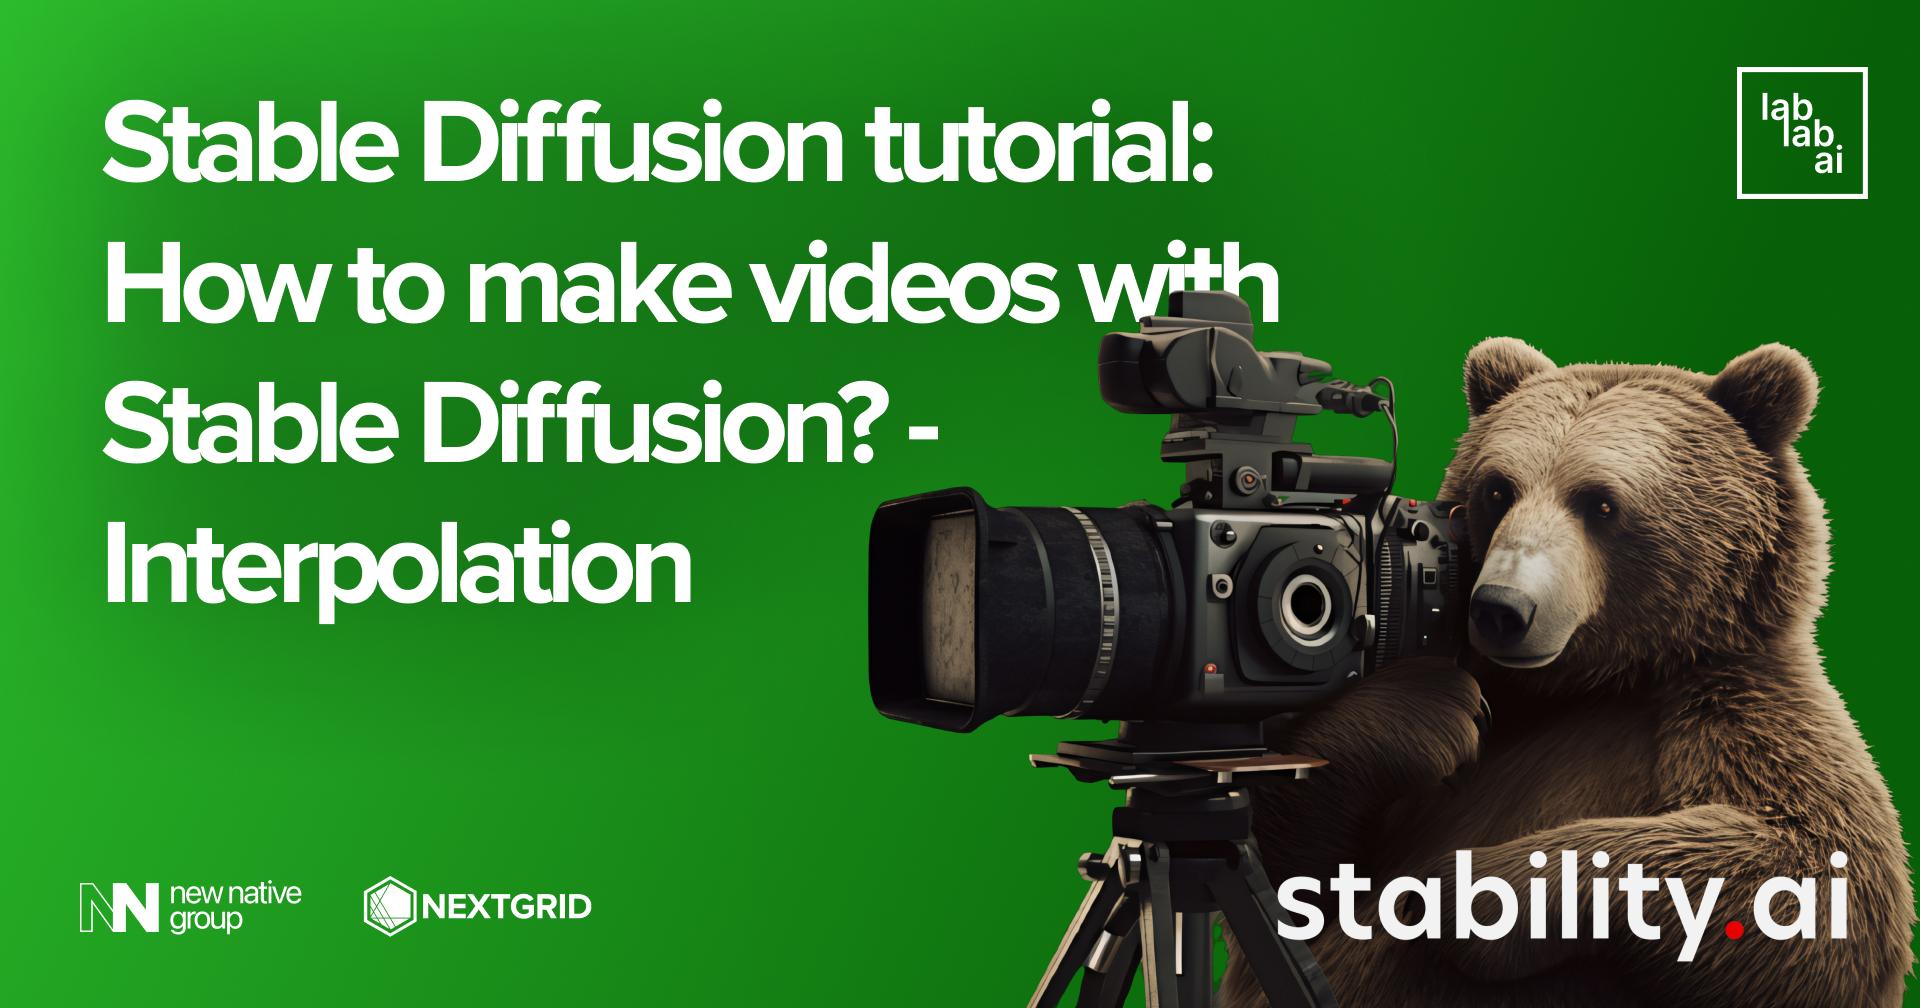 Stable Diffusion tutorial: How to make videos with Stable Diffusion? - Interpolation